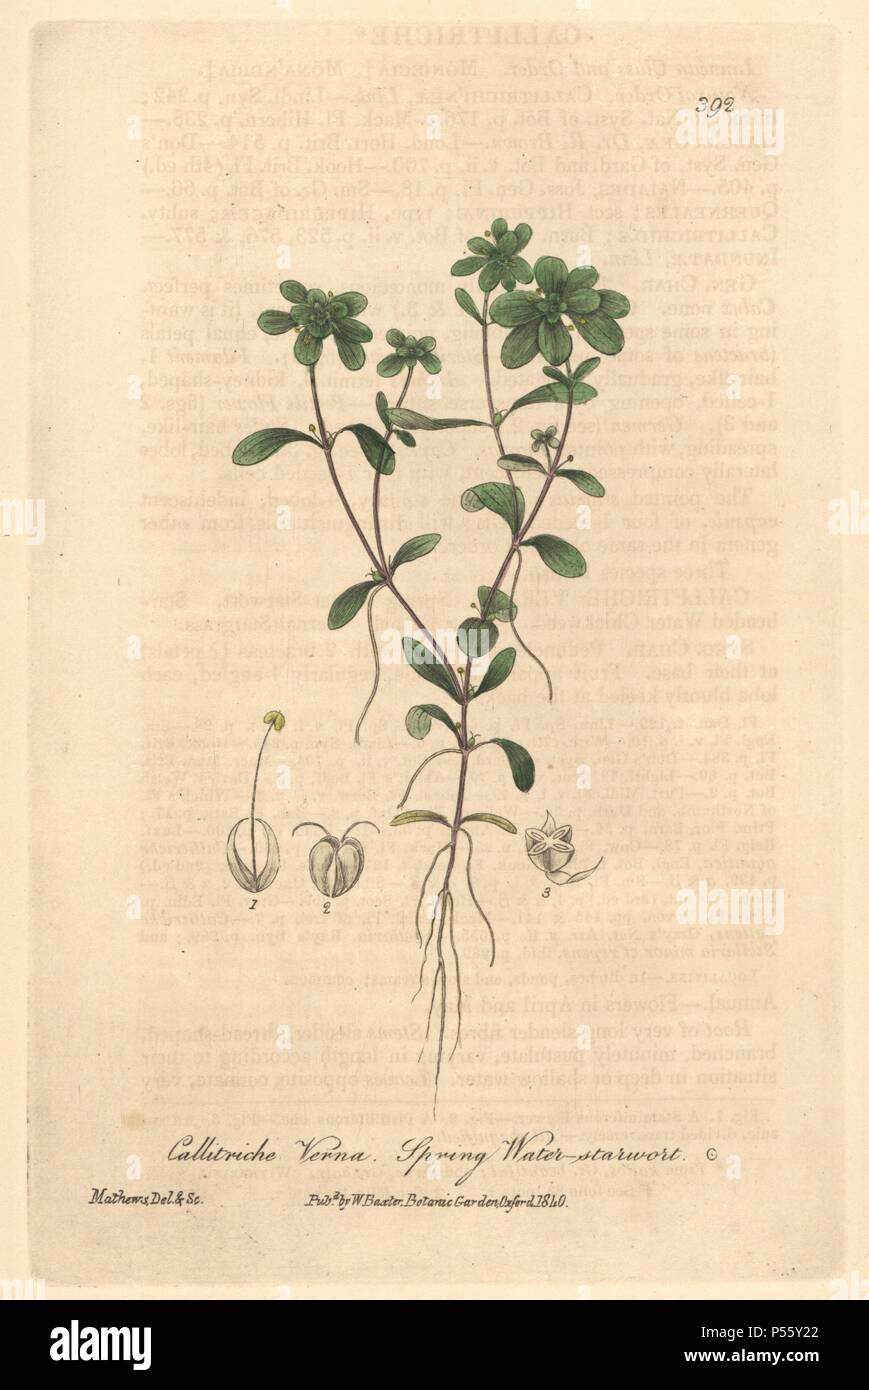 Spring water starwort, Callitriche verna. Handcoloured copperplate drawn and engraved by Charles Mathews from William Baxter's 'British Phaenogamous Botany,' Oxford, 1840. Scotsman William Baxter (1788-1871) was the curator of the Oxford Botanic Garden from 1813 to 1854. Stock Photo